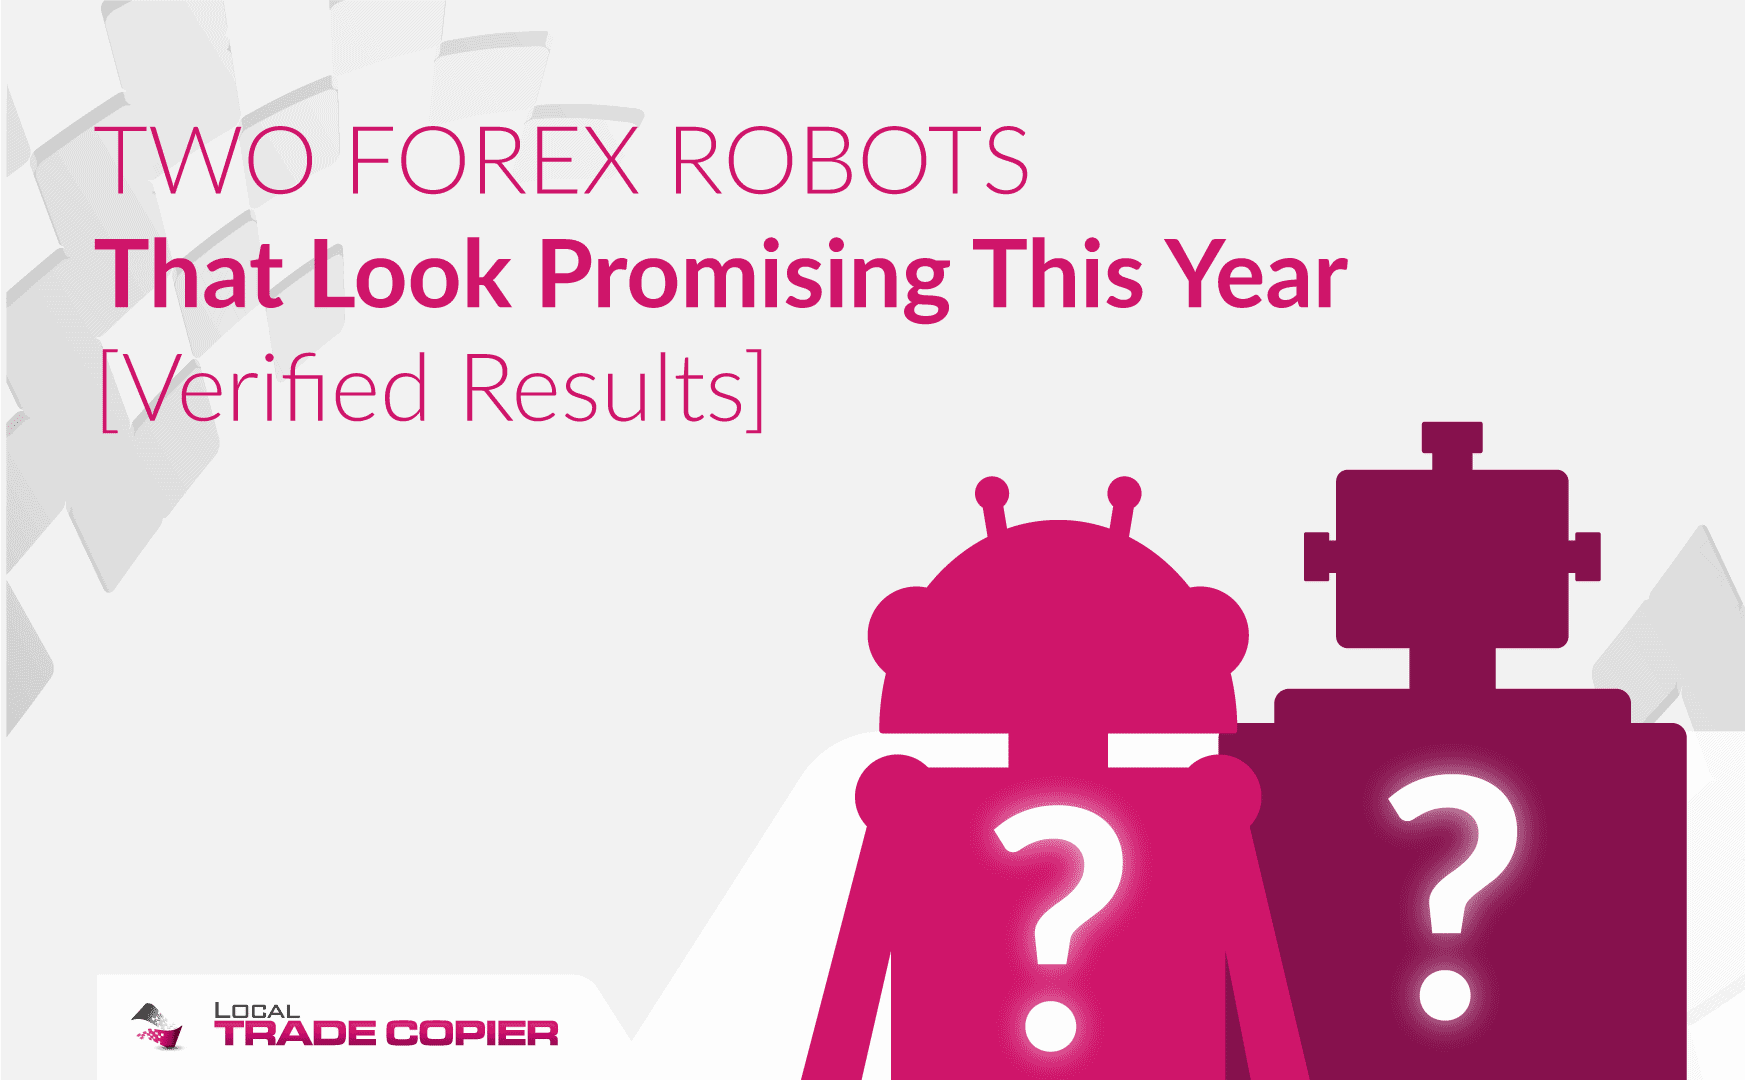 Local-Trade-Copier-Tutorials-Two-Forex-Robots-That-Look-Promising-This-Year-1745x1080